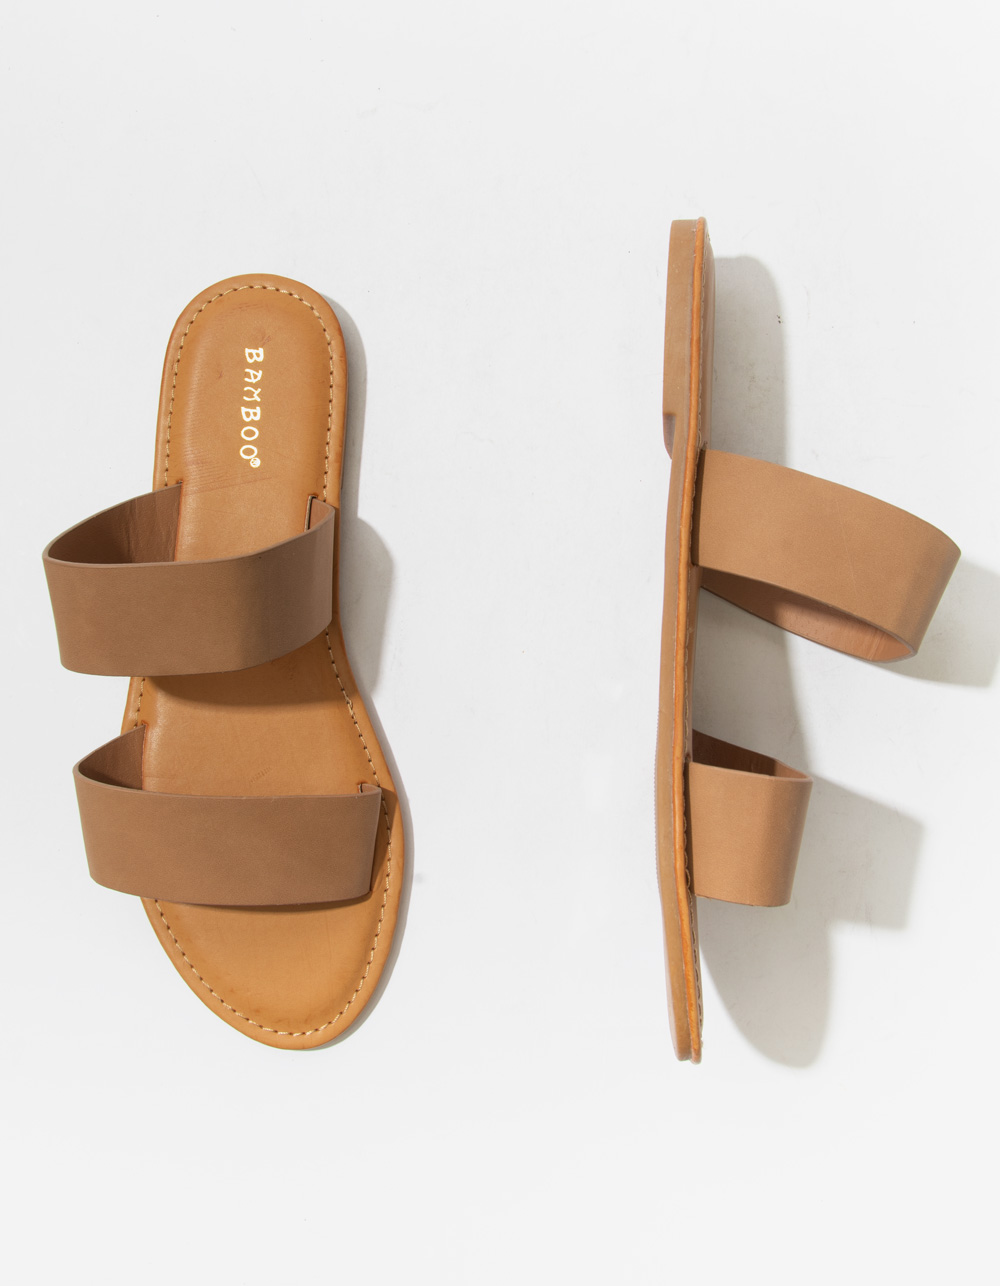 Alexis Double Band Strappy Sandals